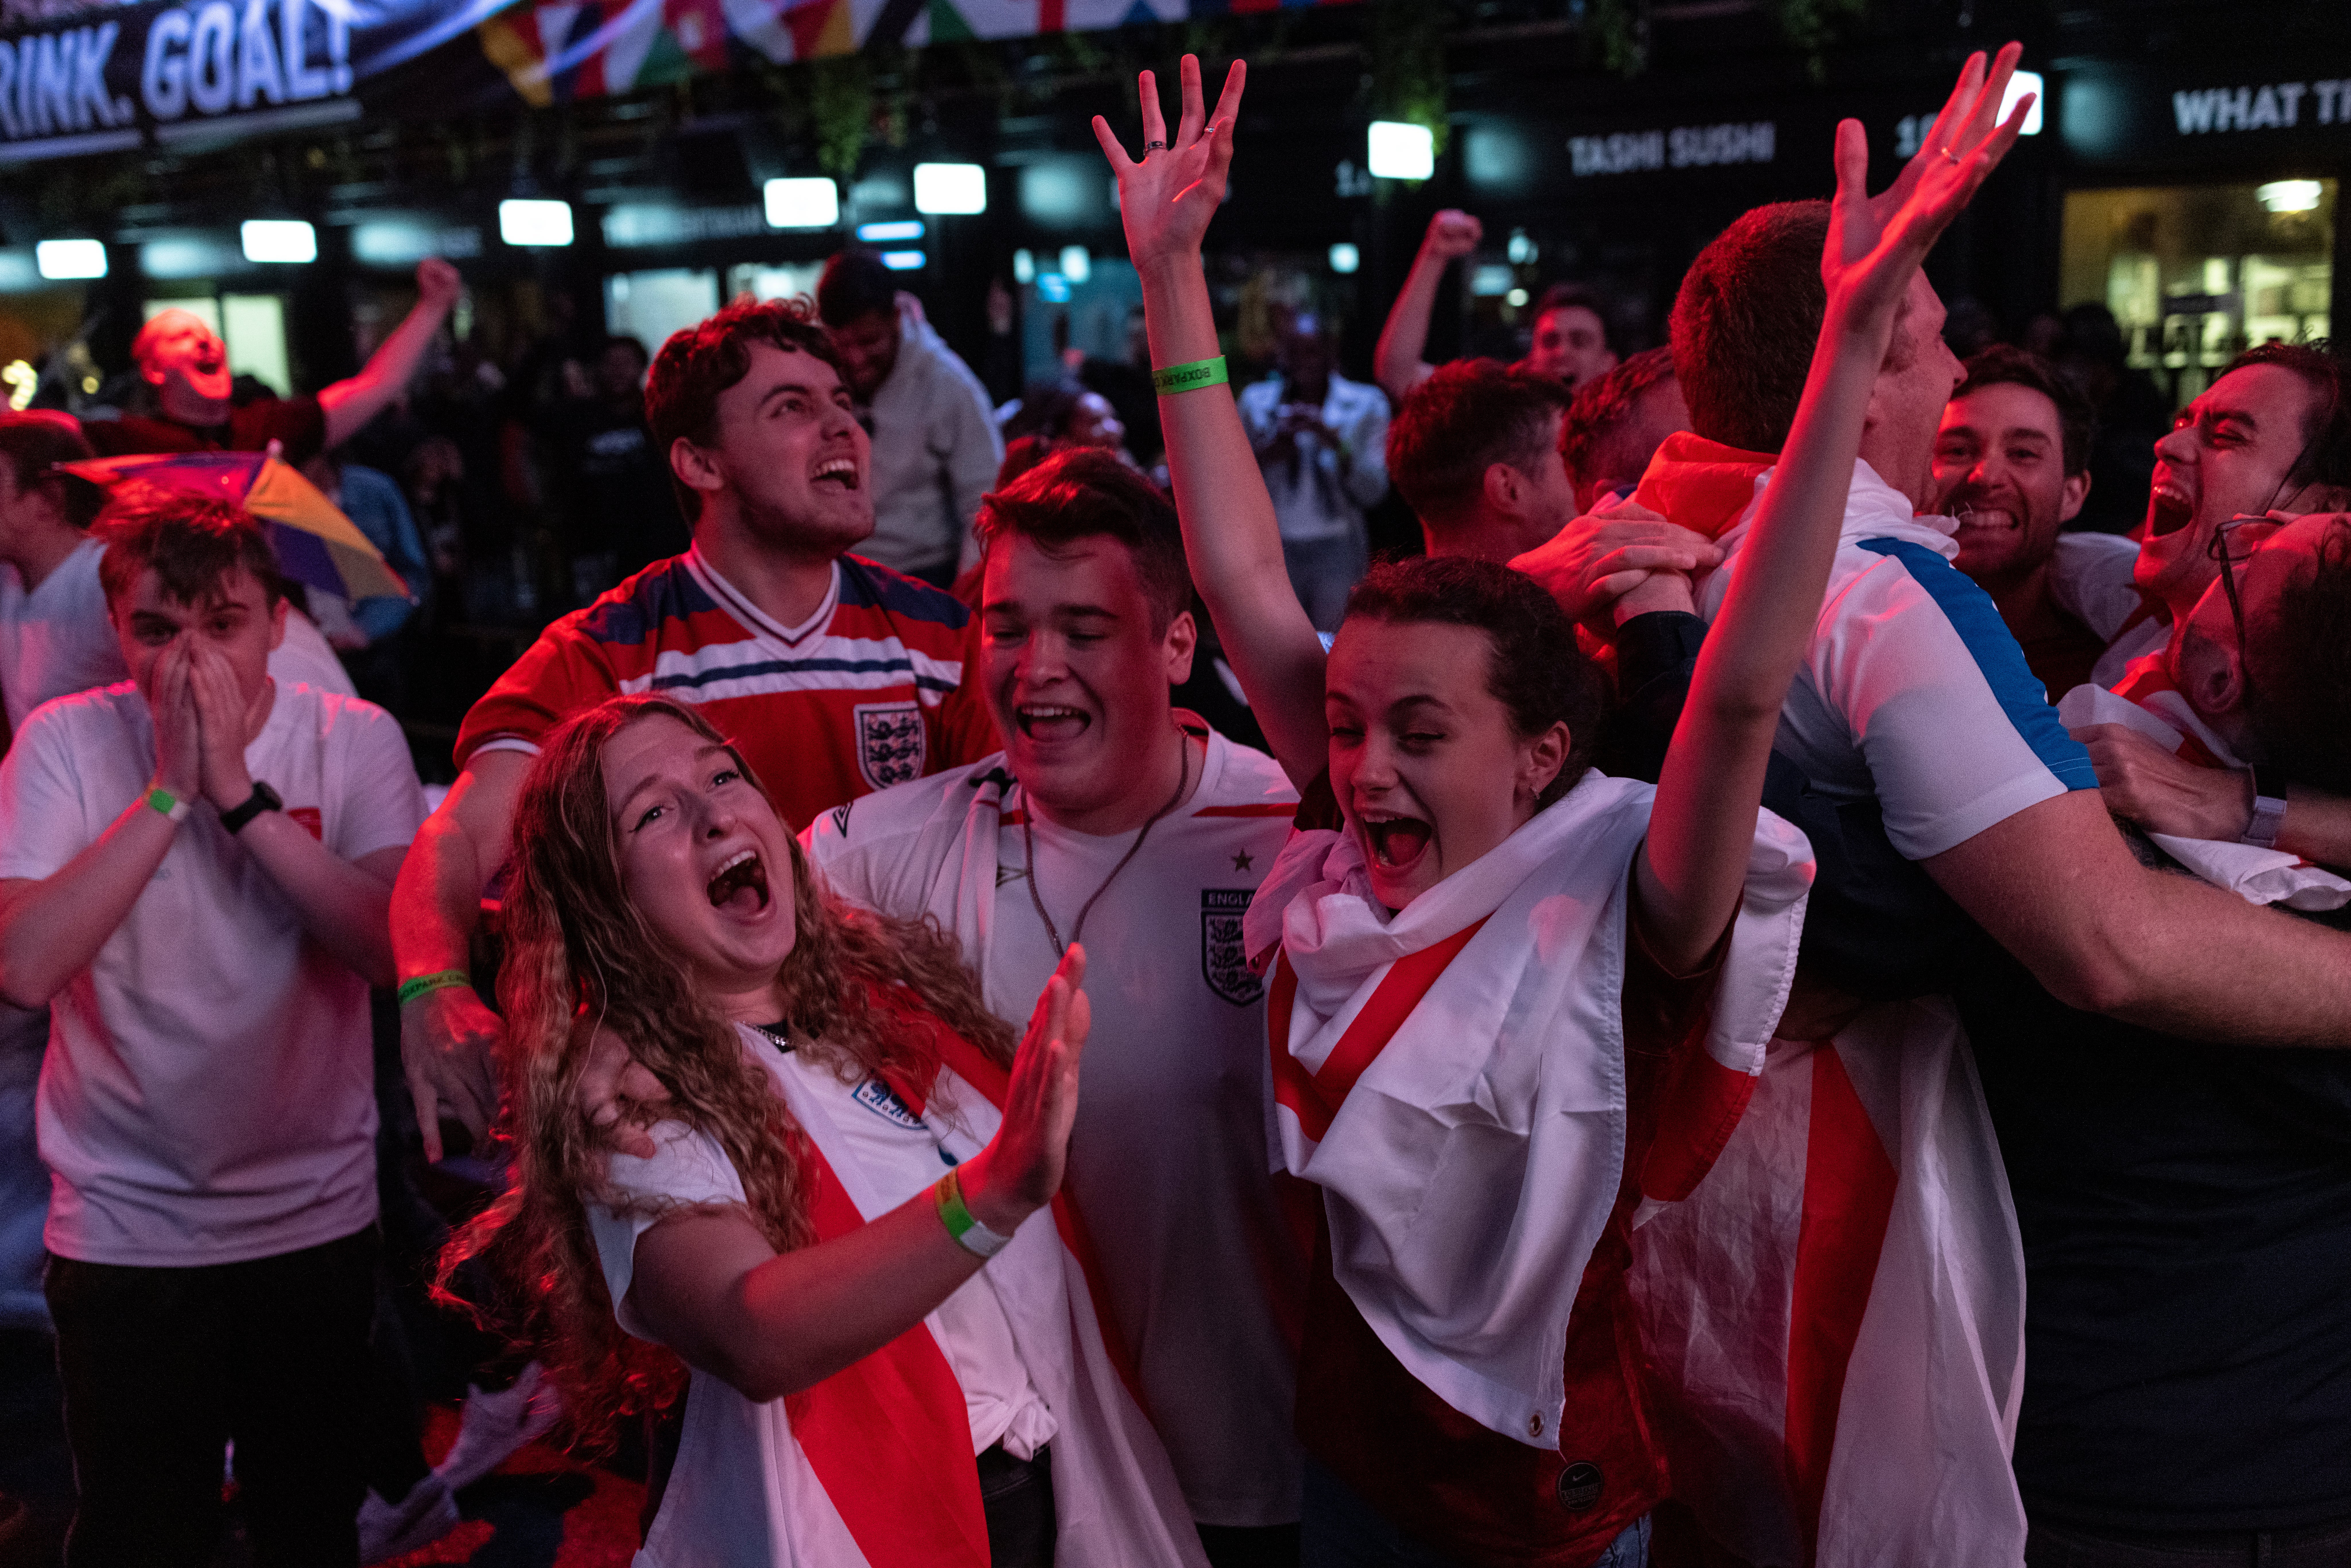 England fans cheer during England v Denmark on 7 July, 2020